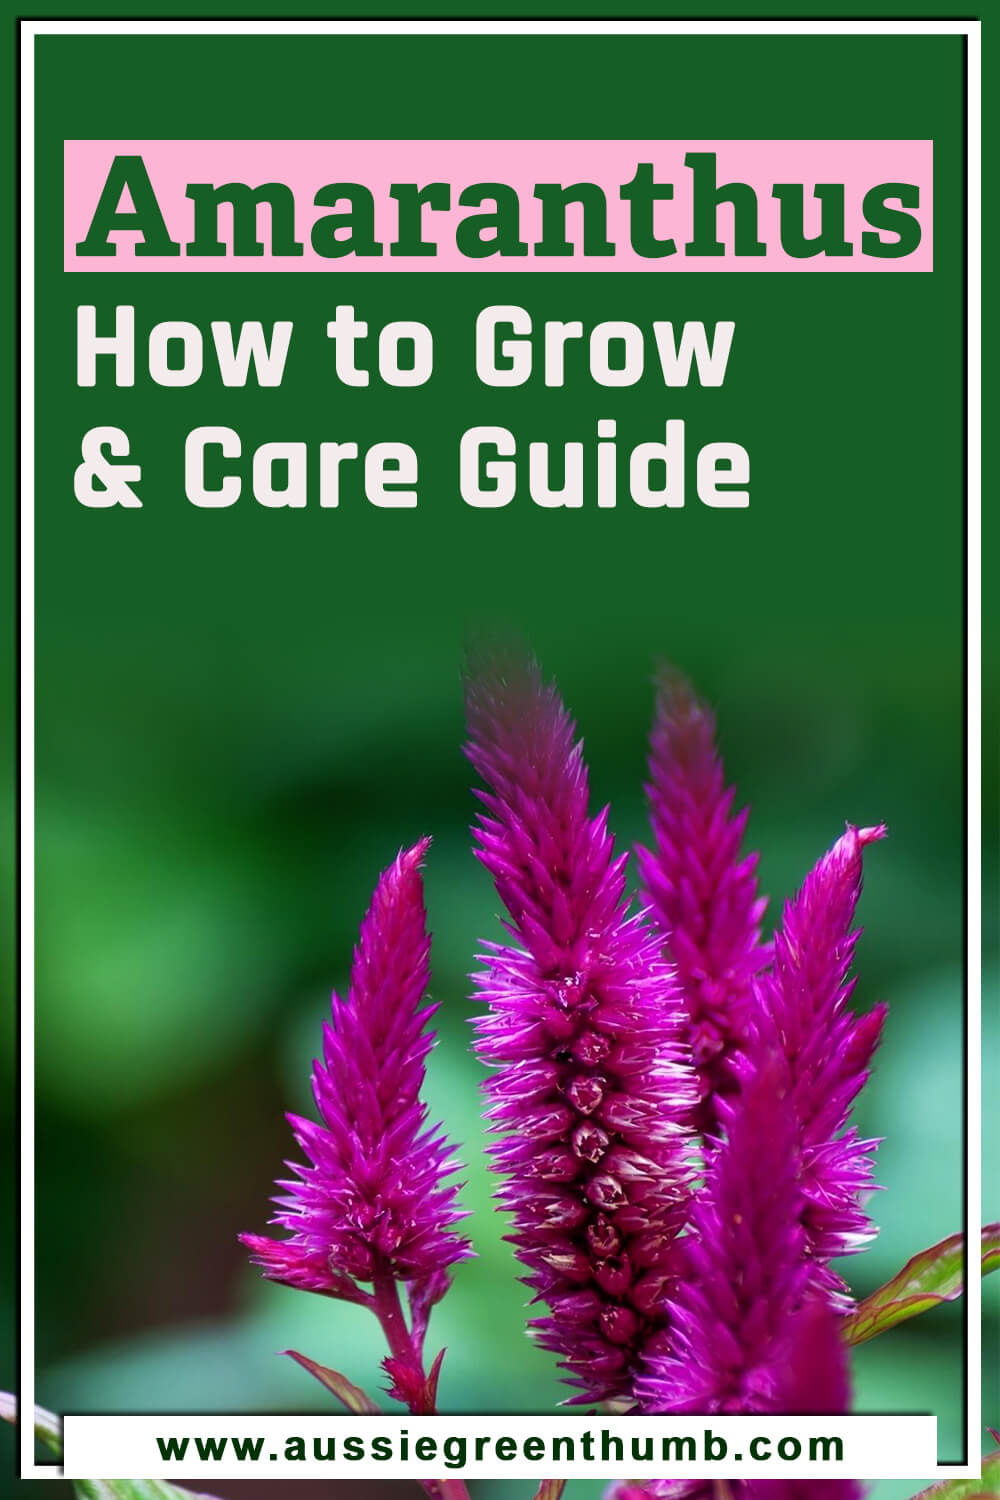 Amaranthus How to Grow and Care Guide